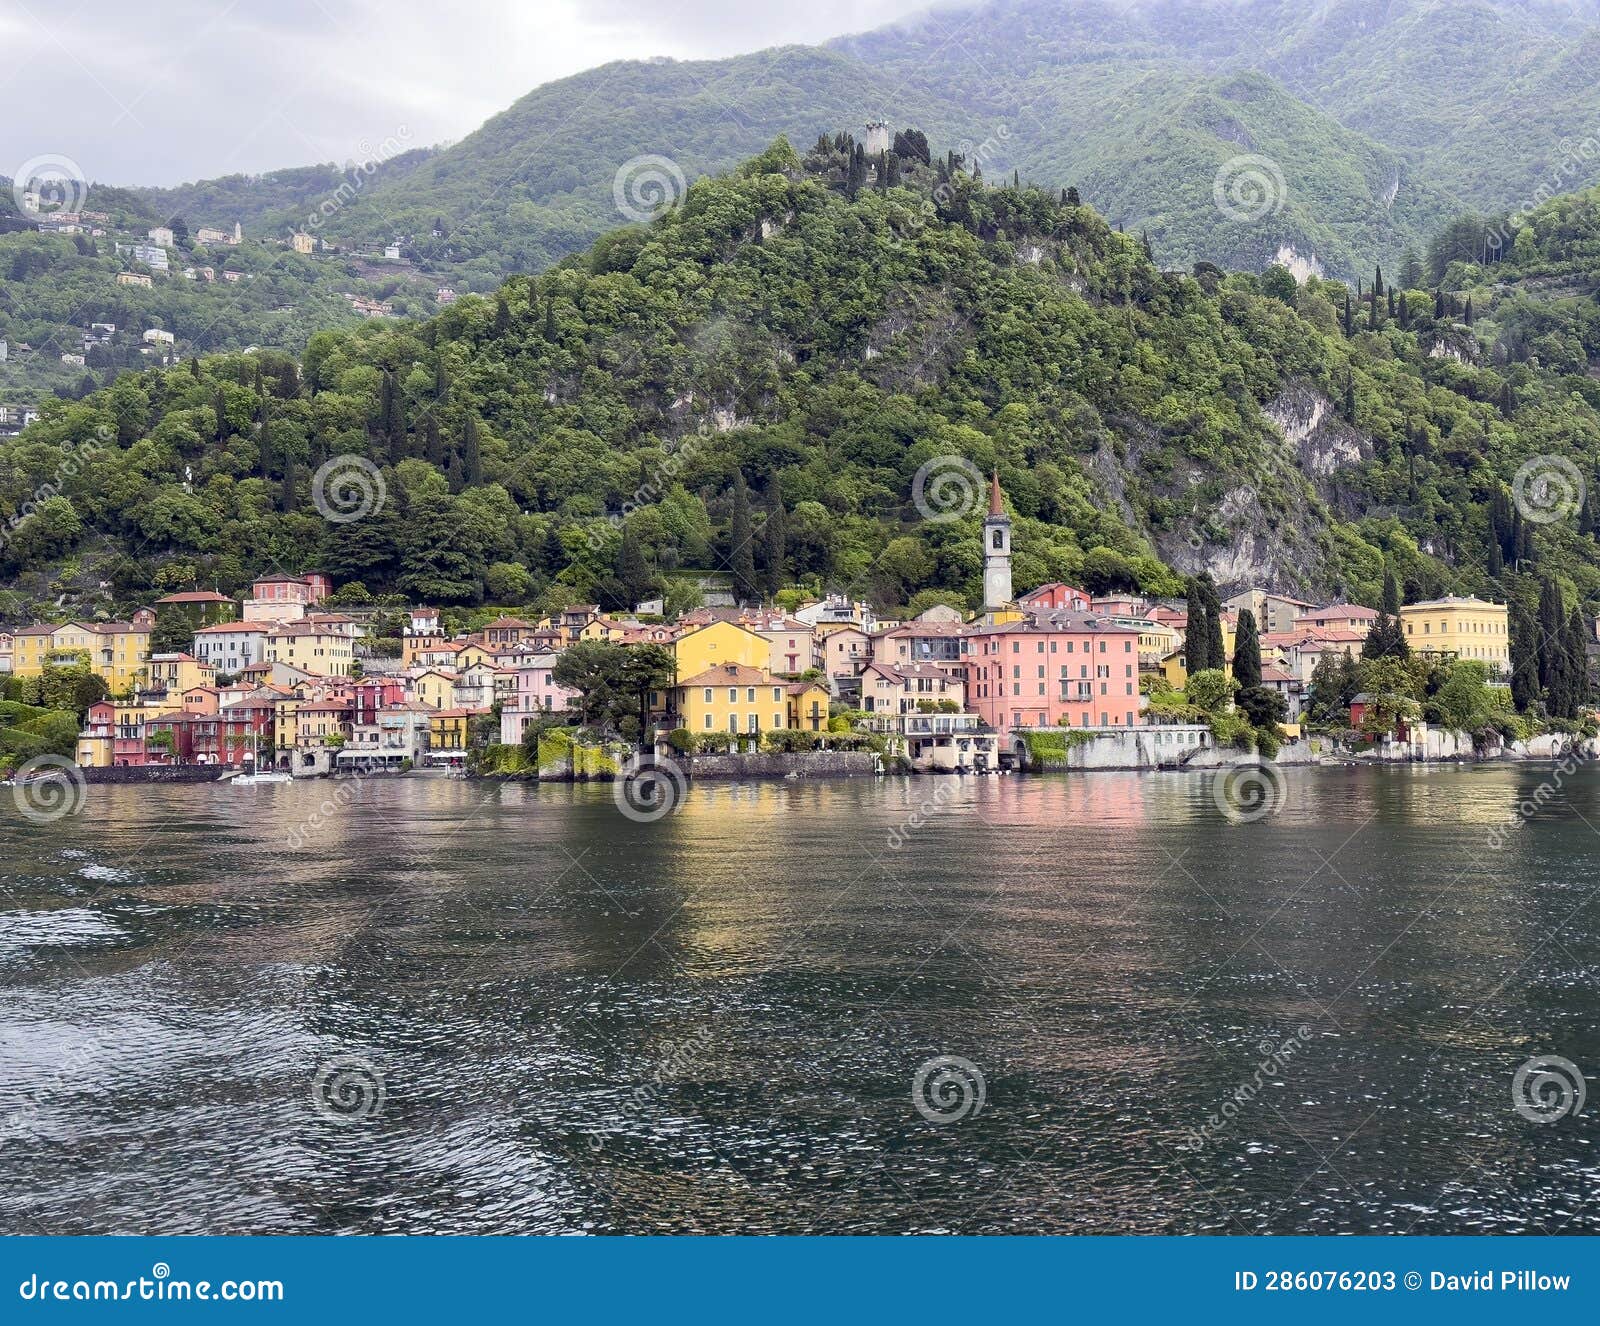 varenna with the spire of the church of saint george from a ferry on lake como.